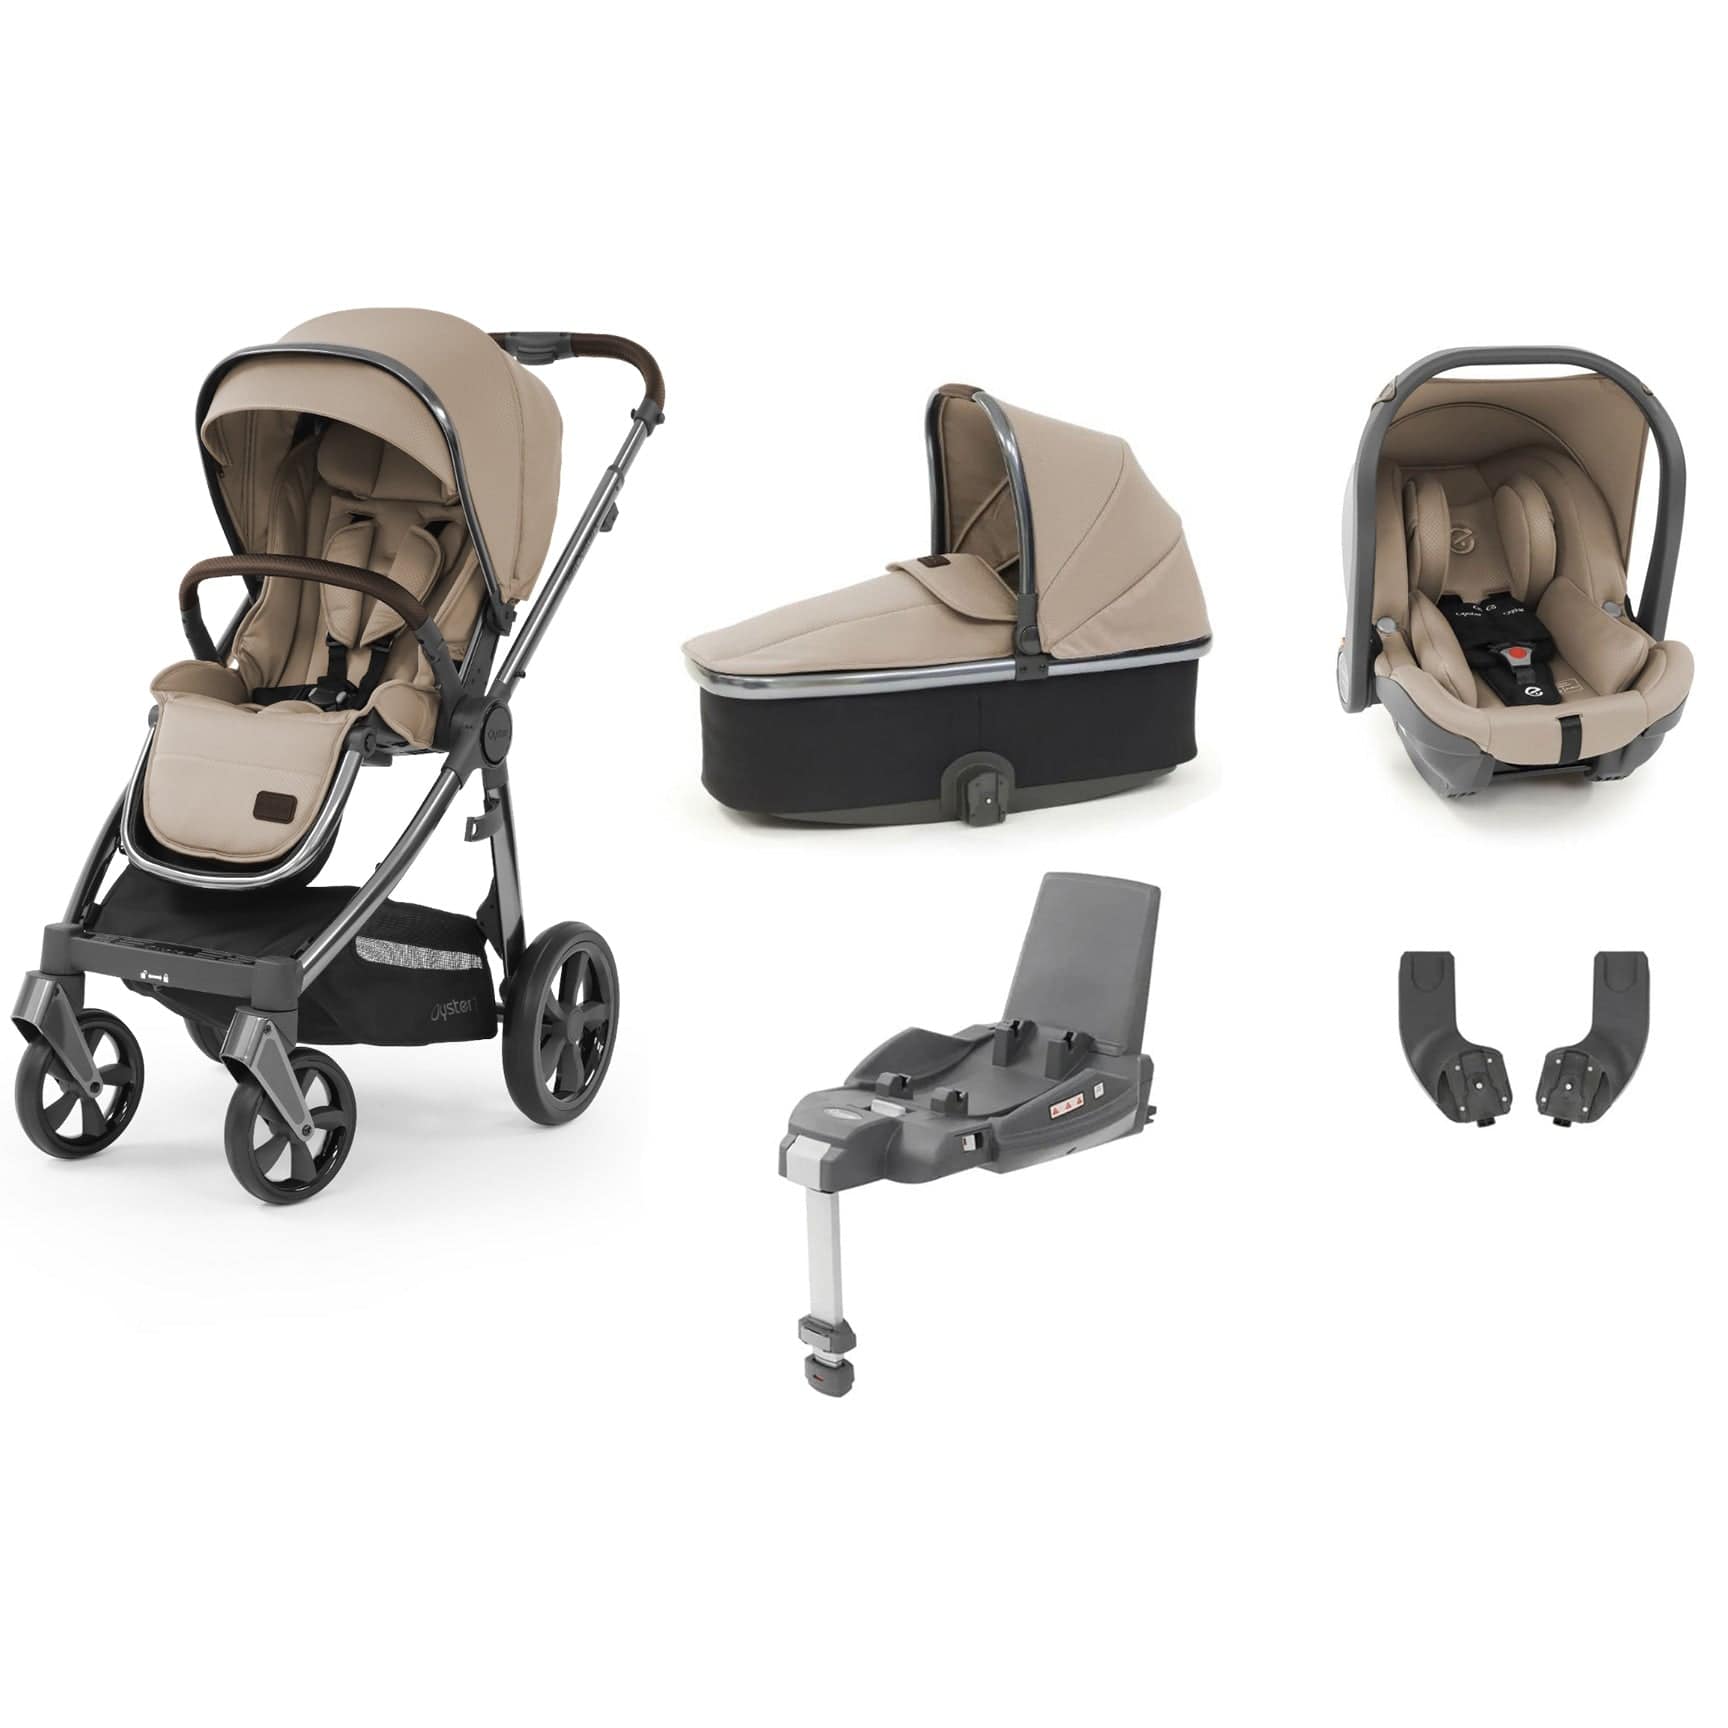 Babystyle Oyster 3 Essential Bundle with Car Seat in Butterscotch Travel Systems 9111-BTS 5060711564630